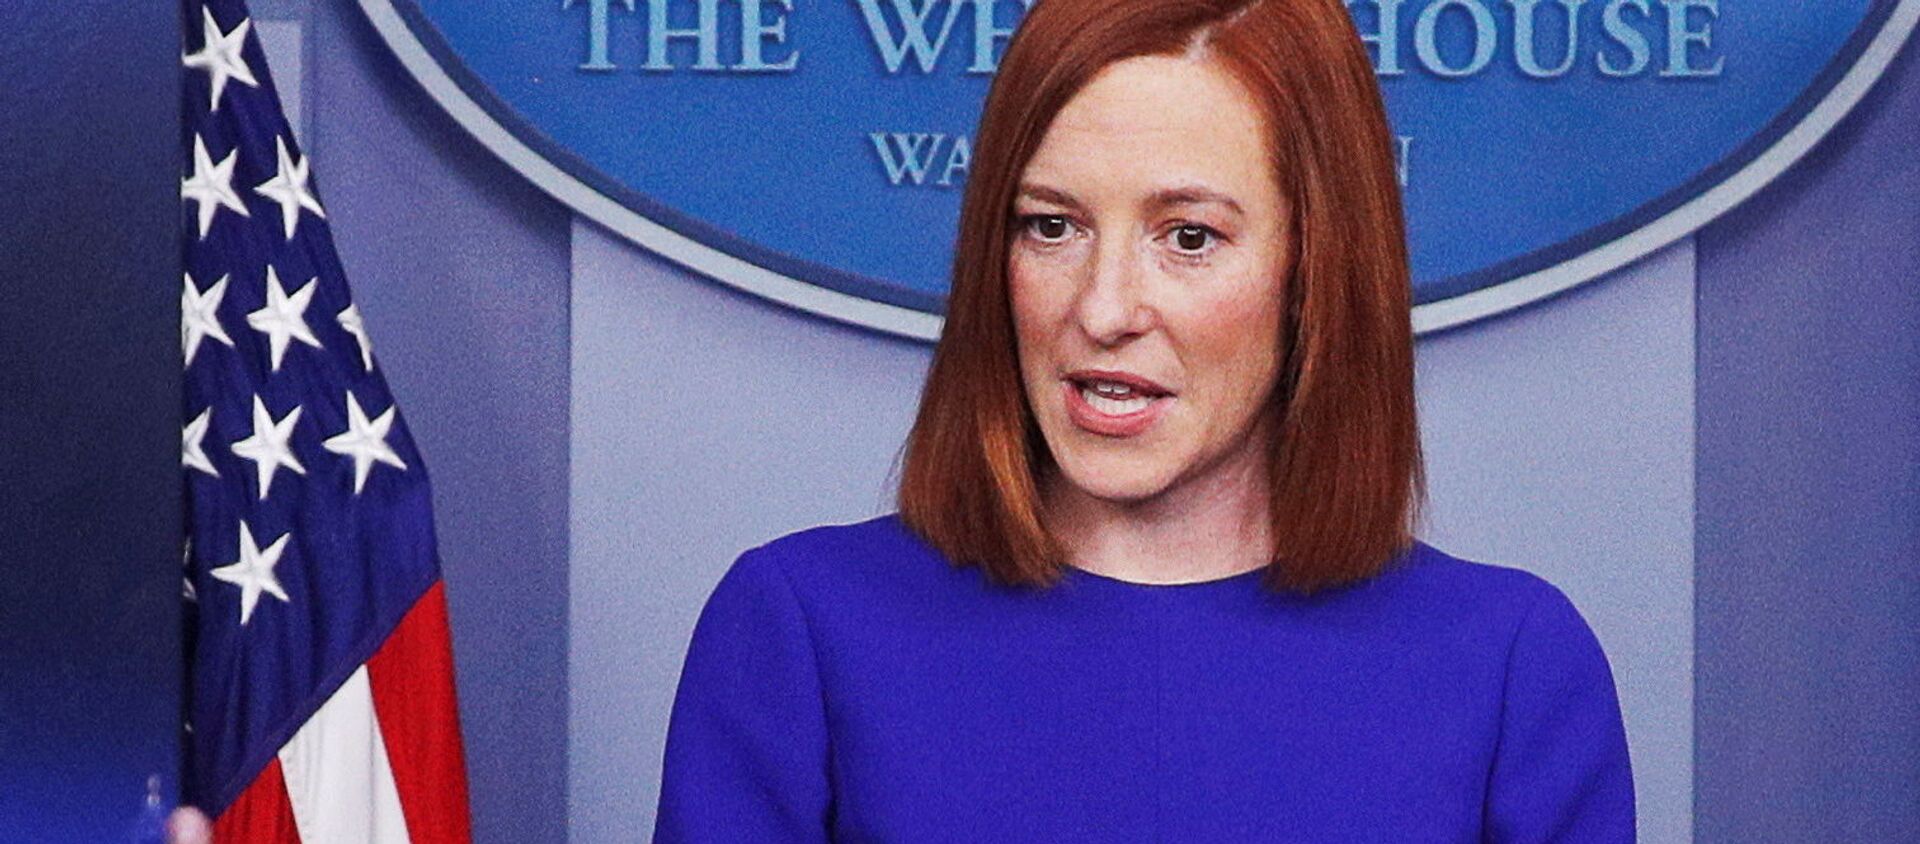 White House Press Secretary Jen Psaki takes questions from journalists in the James S Brady Press Briefing Room at the White House, after the inauguration of Joe Biden as the 46th President of the United States, U.S., January 20, 2021. - Sputnik International, 1920, 22.01.2021